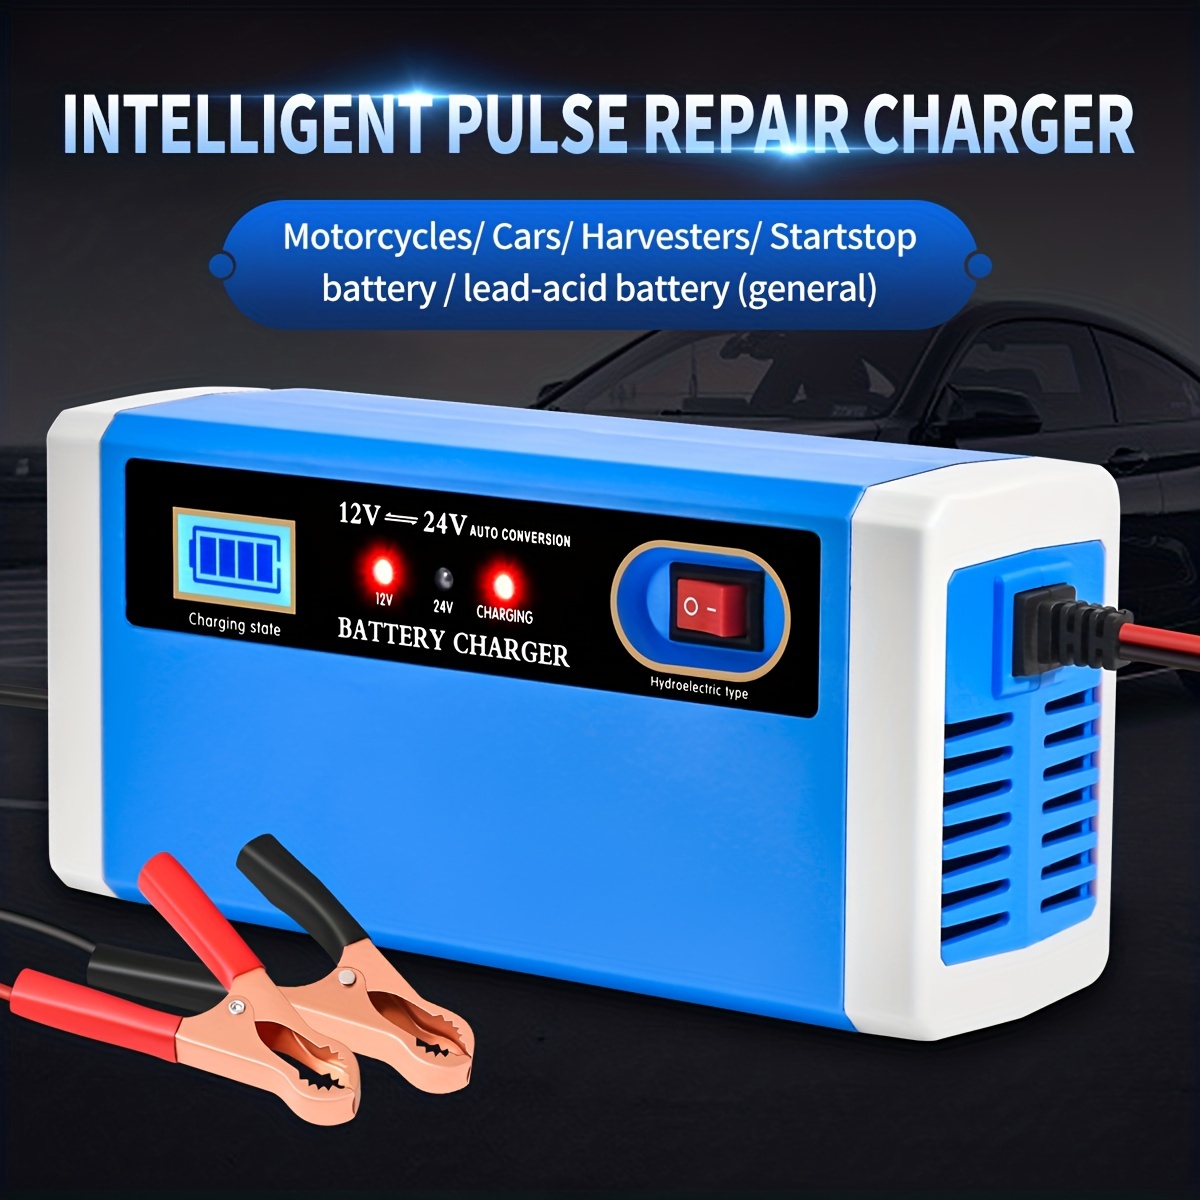 

10 Amp Car Battery Charger 12v And 24v Smart Fully Automatic Battery Charger Maintainer Trickle Charger For Motorcycle Lead Acid Batteries, Eu Socket